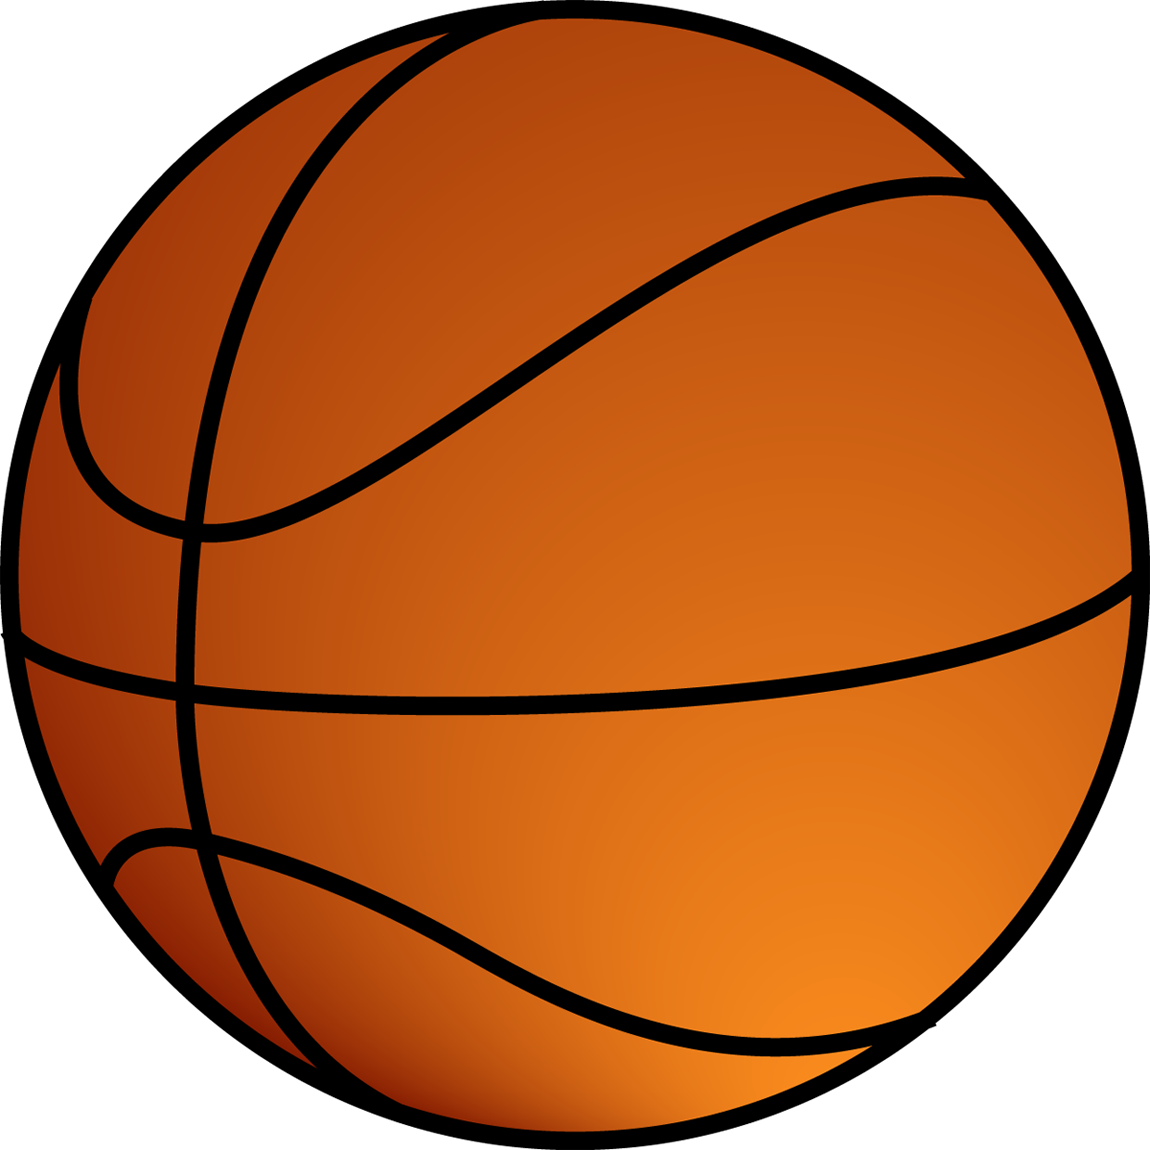 basketball png images